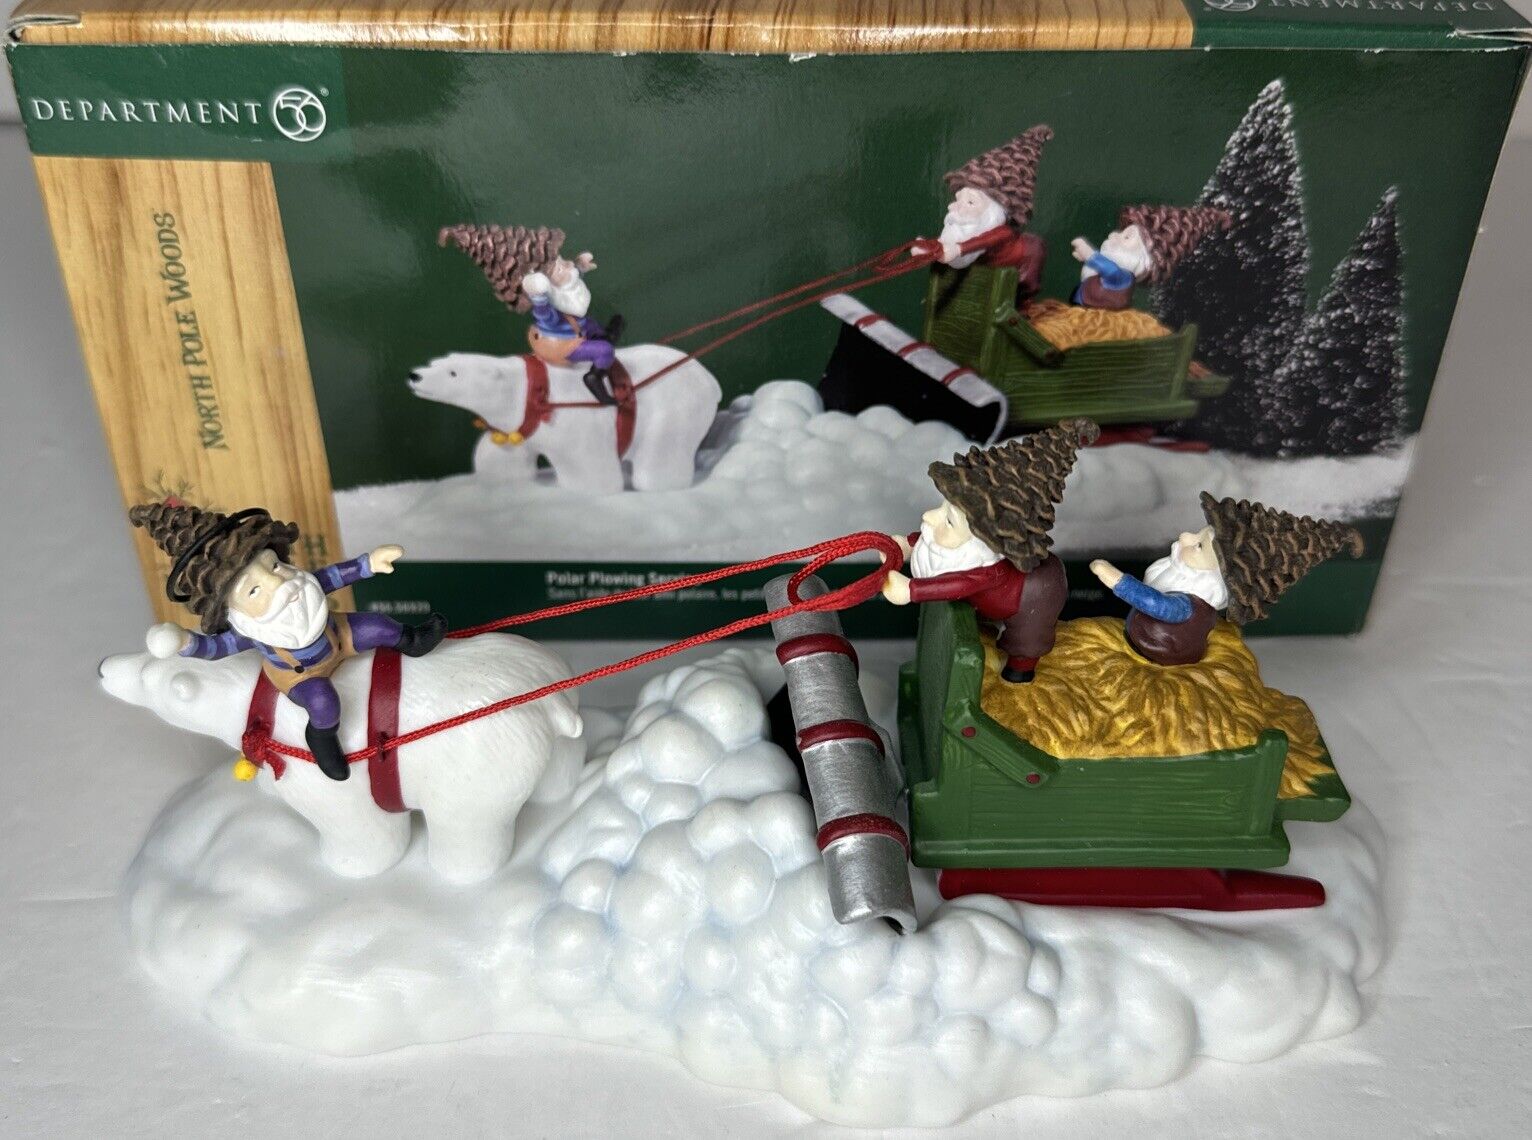 Department 56 “Polar Plowing Service” #56929 North Pole Woods - Retired - 2000